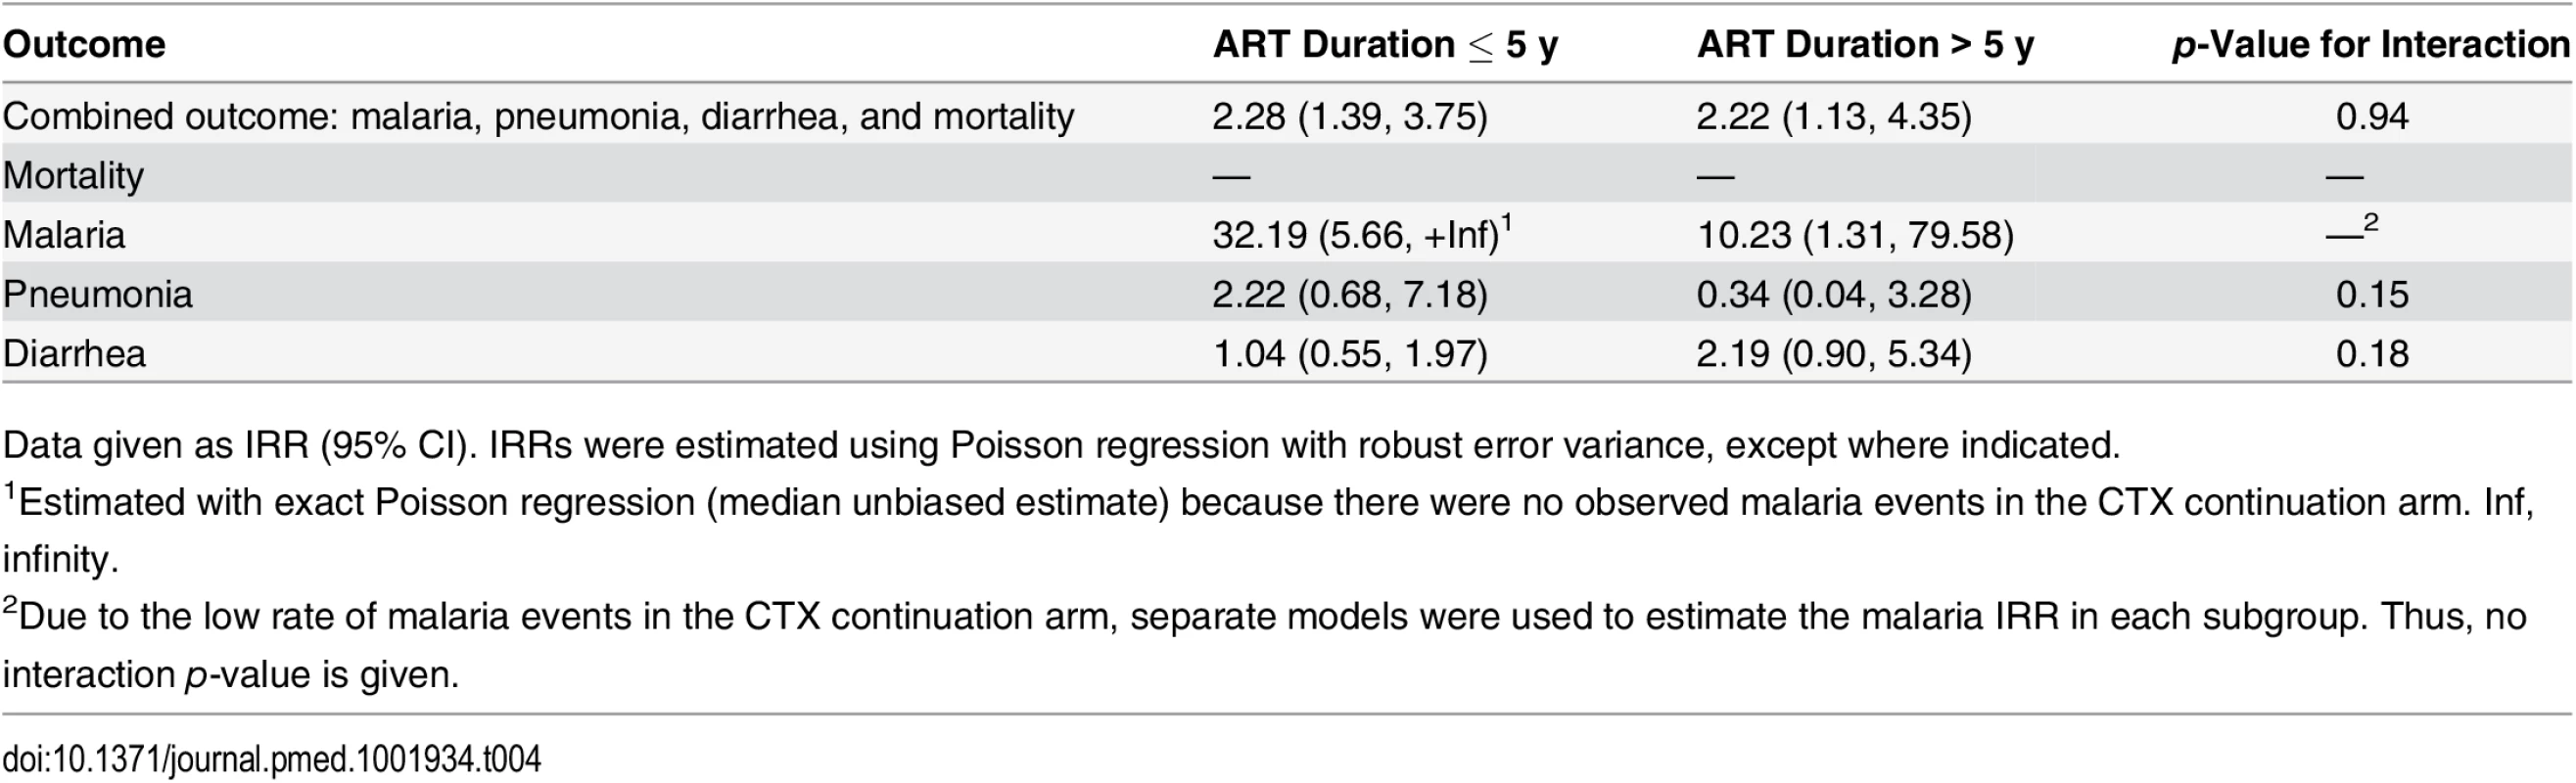 Subgroup analyses by ART duration: comparing CTX discontinuation to CTX continuation arms.